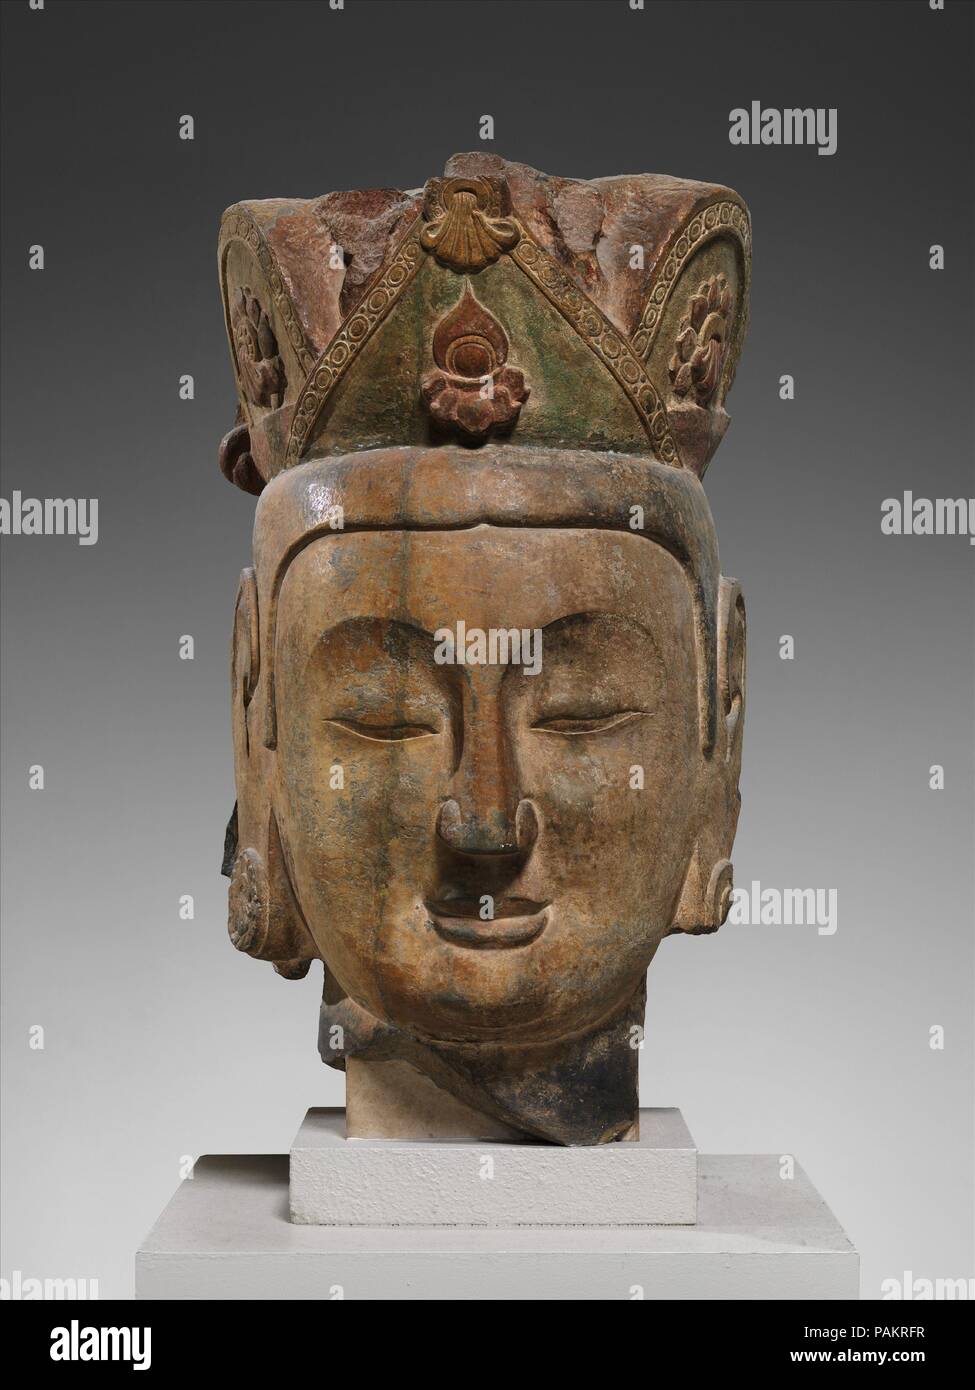 Head of an Attendant Bodhisattva. Culture: China. Dimensions: H. 32 in. (81.3 cm); W. 17 1/2 in. (44.5 cm); approx. D. 12 in. (30.5 cm). Date: ca. 565-75.  This head once belonged to a towering bodhisattva who presided over the entrance to the Central Cave at Northern Xiangtangshan. This site, which consists of only three cave temples with colossal figural sculptures, was once strategically located on the route between the capital at Ye and Jinyang, in Shanxi province. At the beginning of the Northern Qi period, it may have been a place for meditation or other Buddhist activities. Museum: Metr Stock Photo